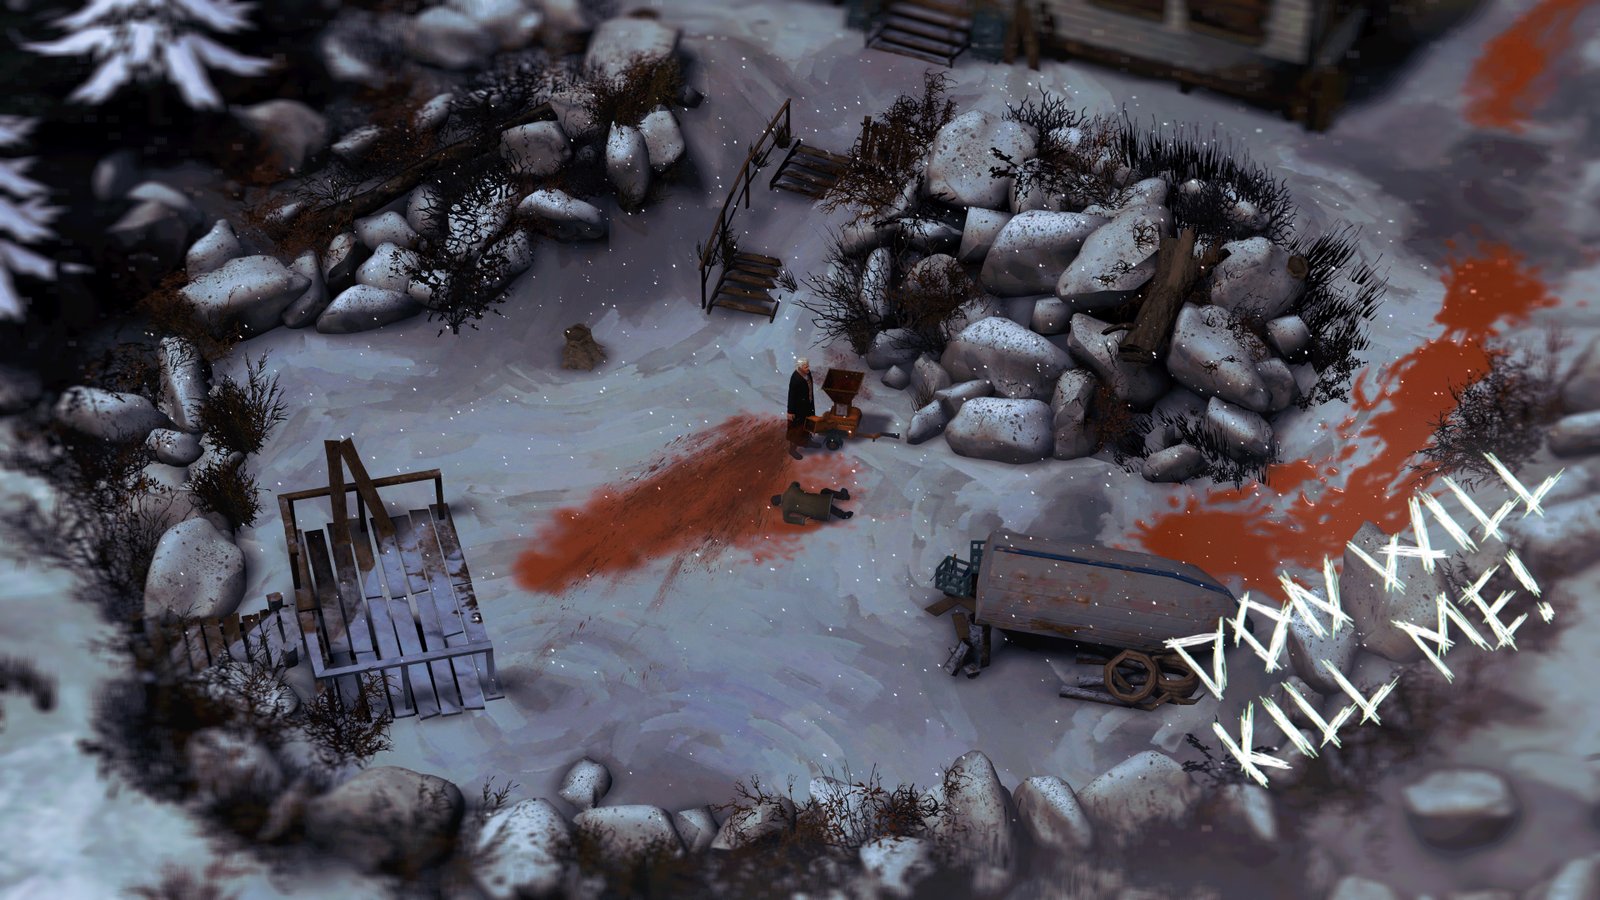 A screenshot of Serial Cleaners showing a body being disposed of in a snowy forest